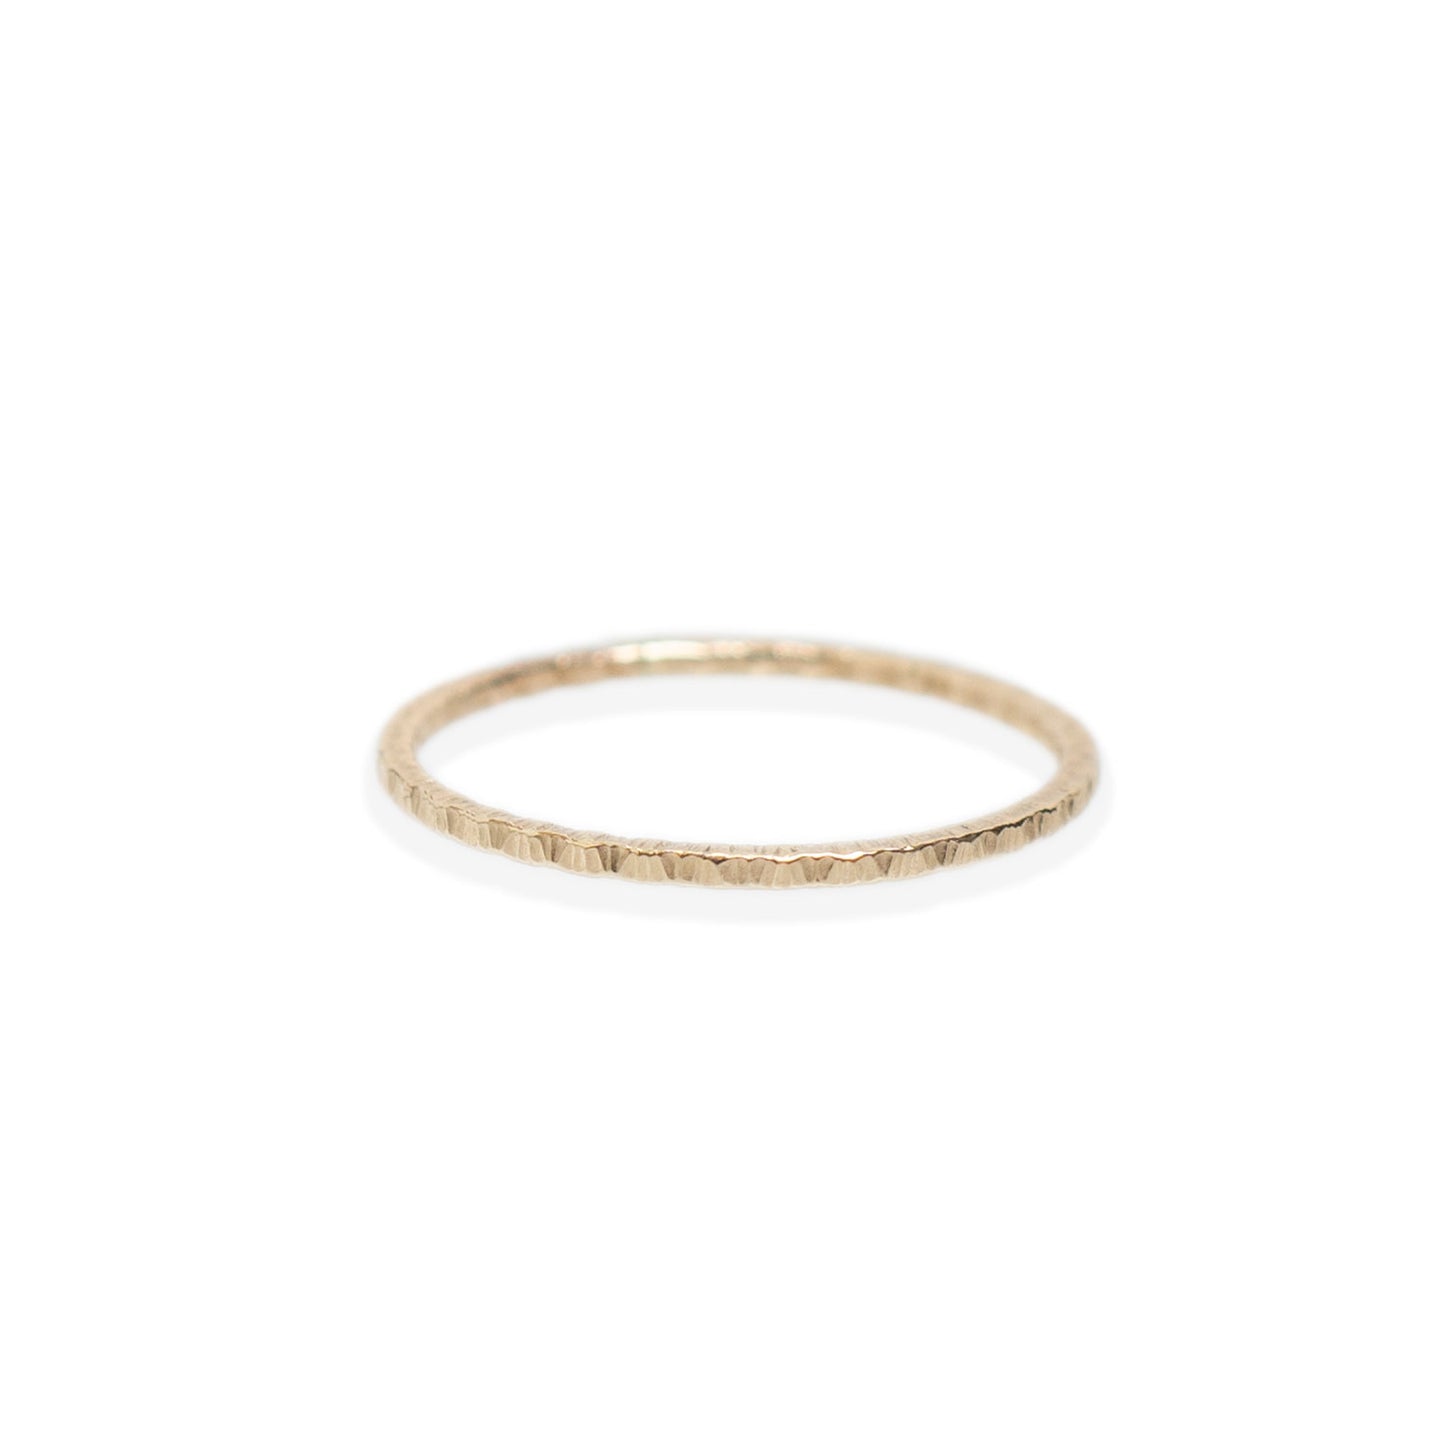 Textured Oat Grain gold filled stacking ring